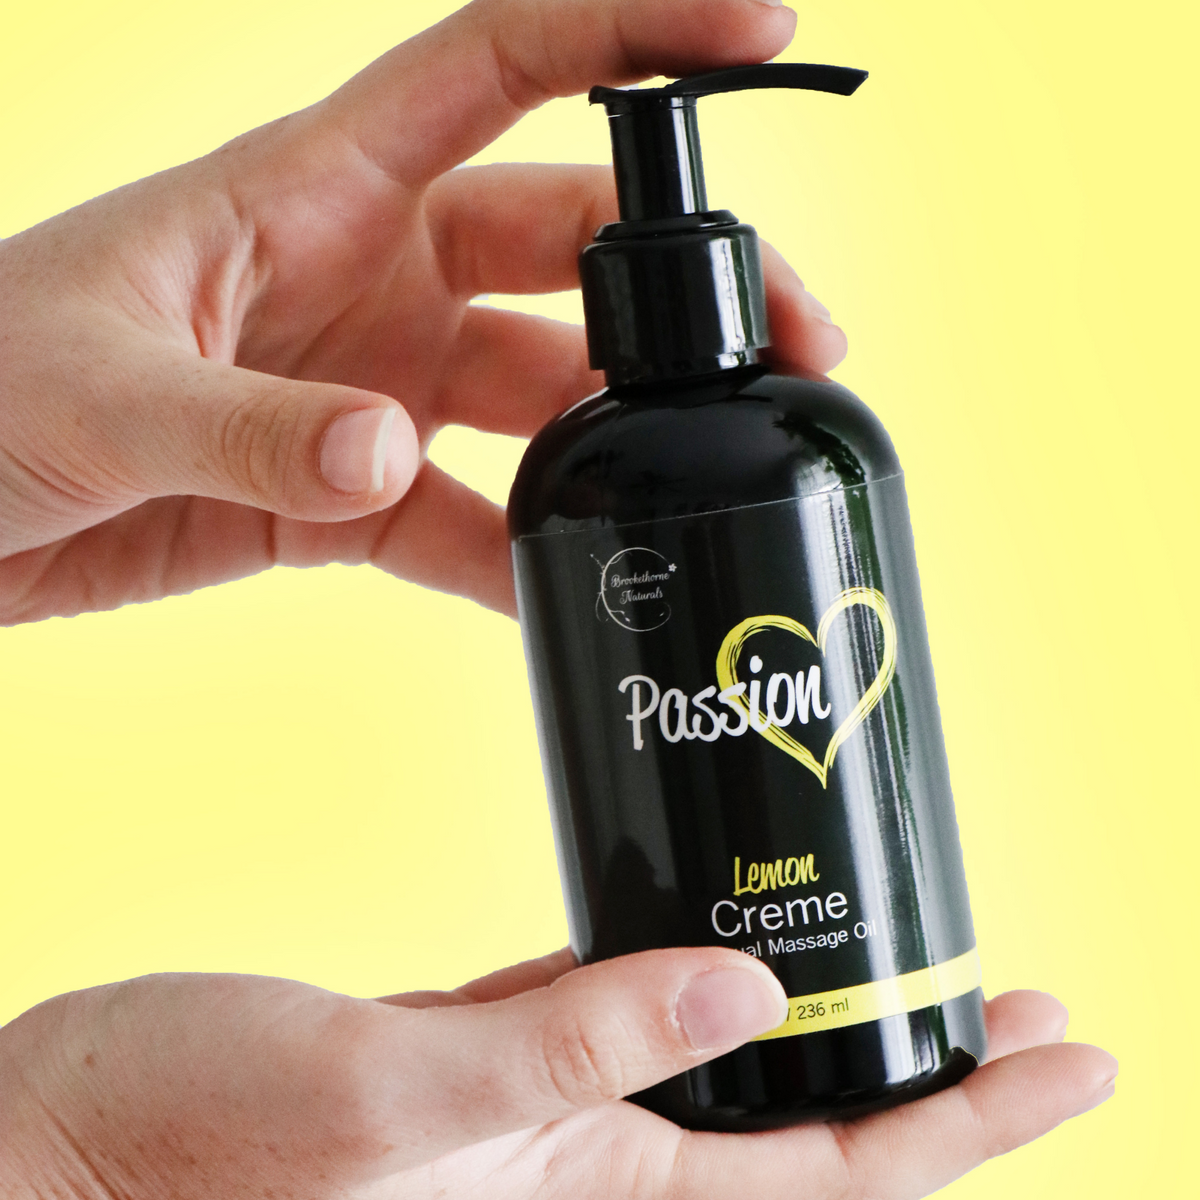 Passion Lemon Creme Bottle being displayed in a womans hands